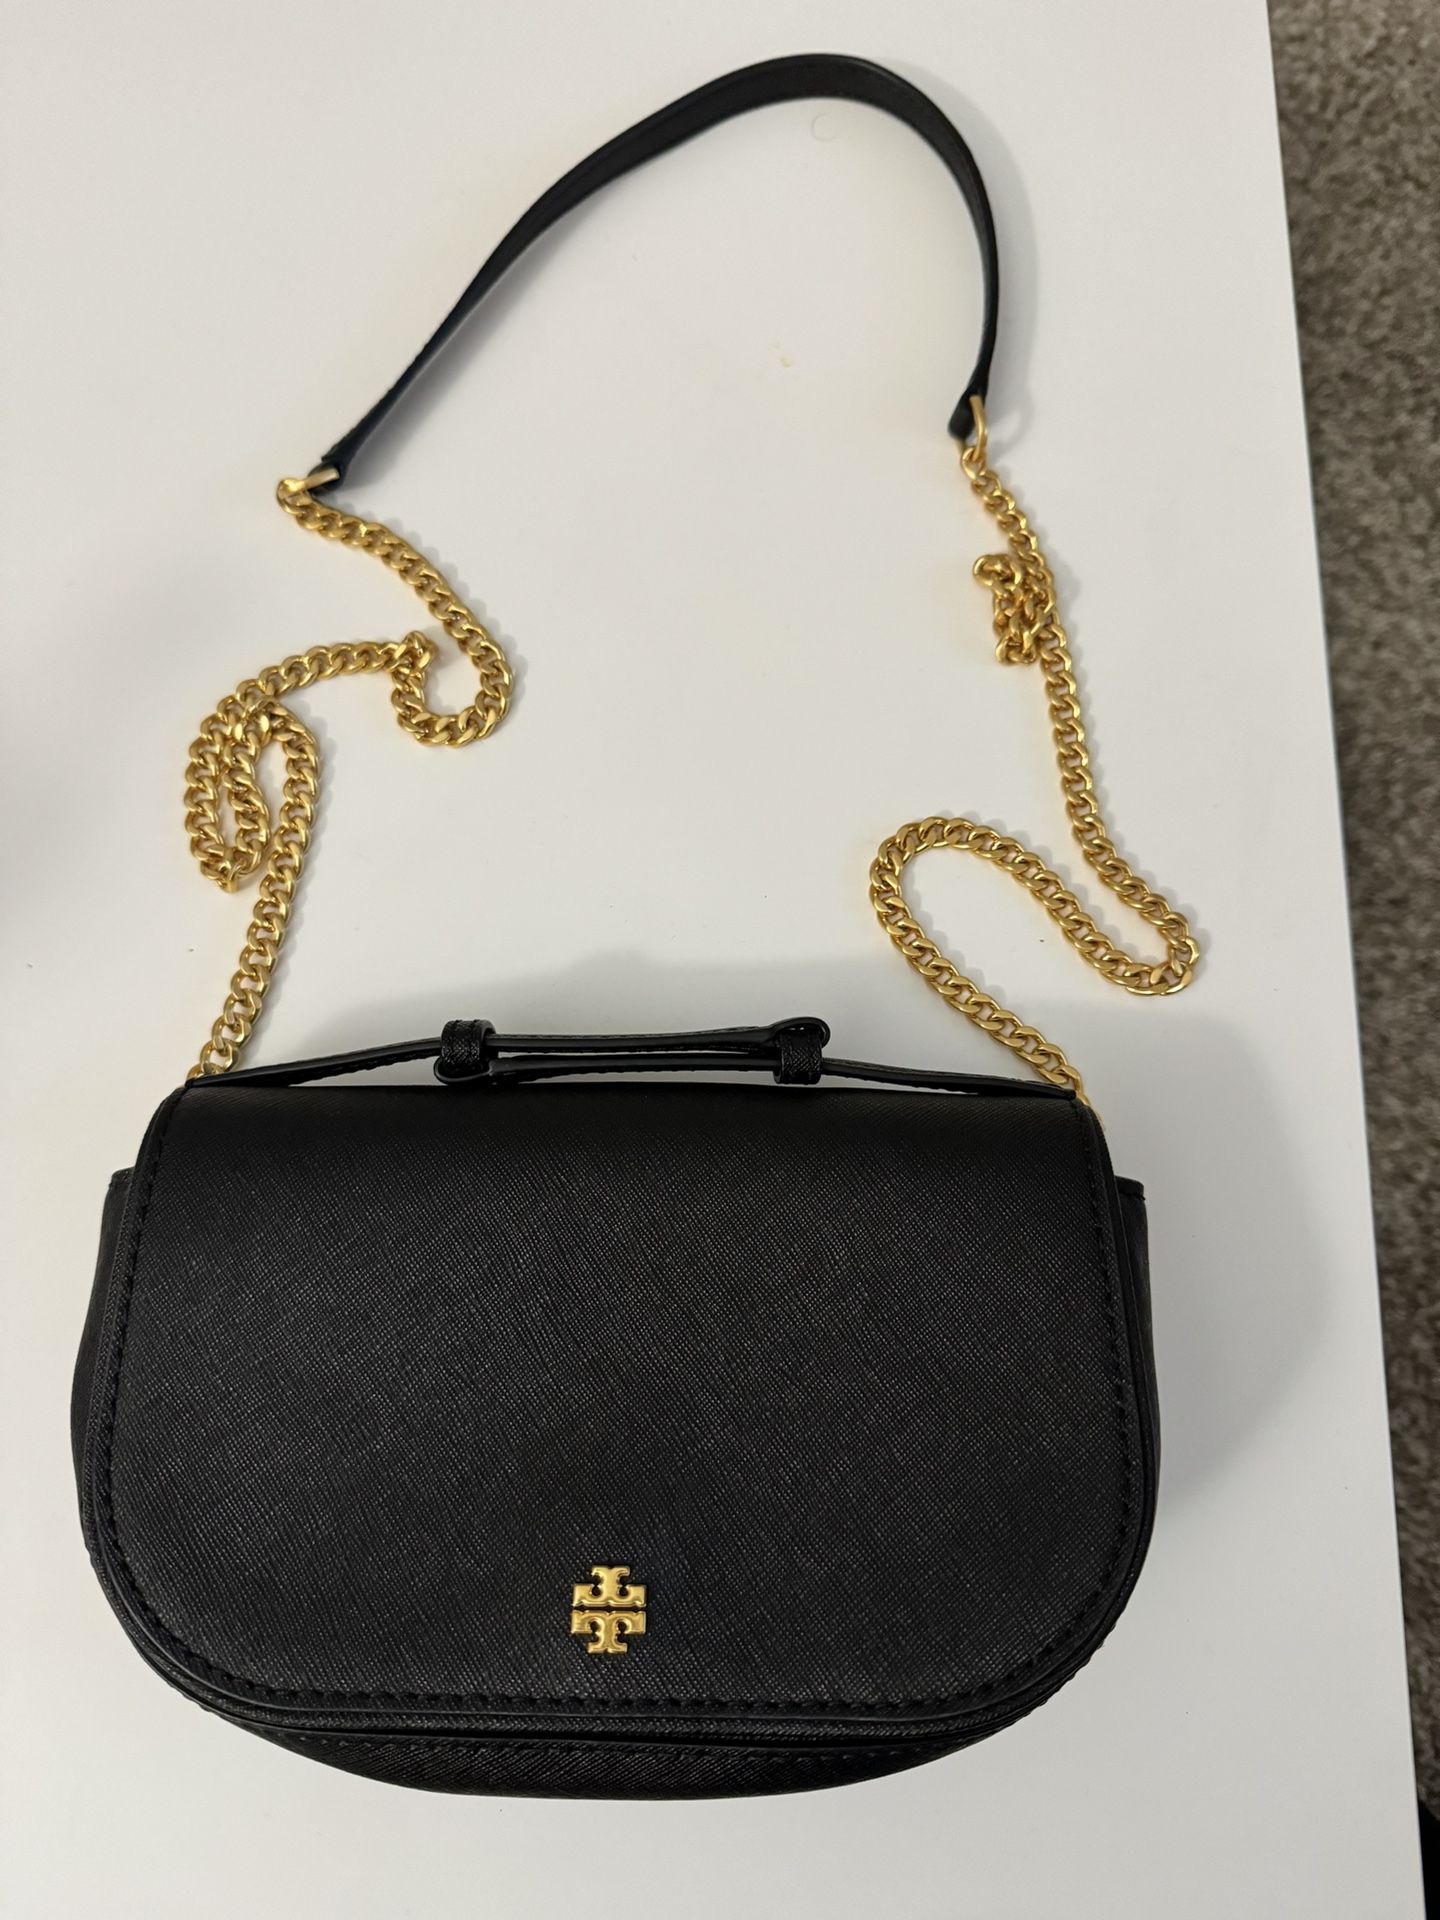 Tory Burch Emerson Top Handle Leather Bag